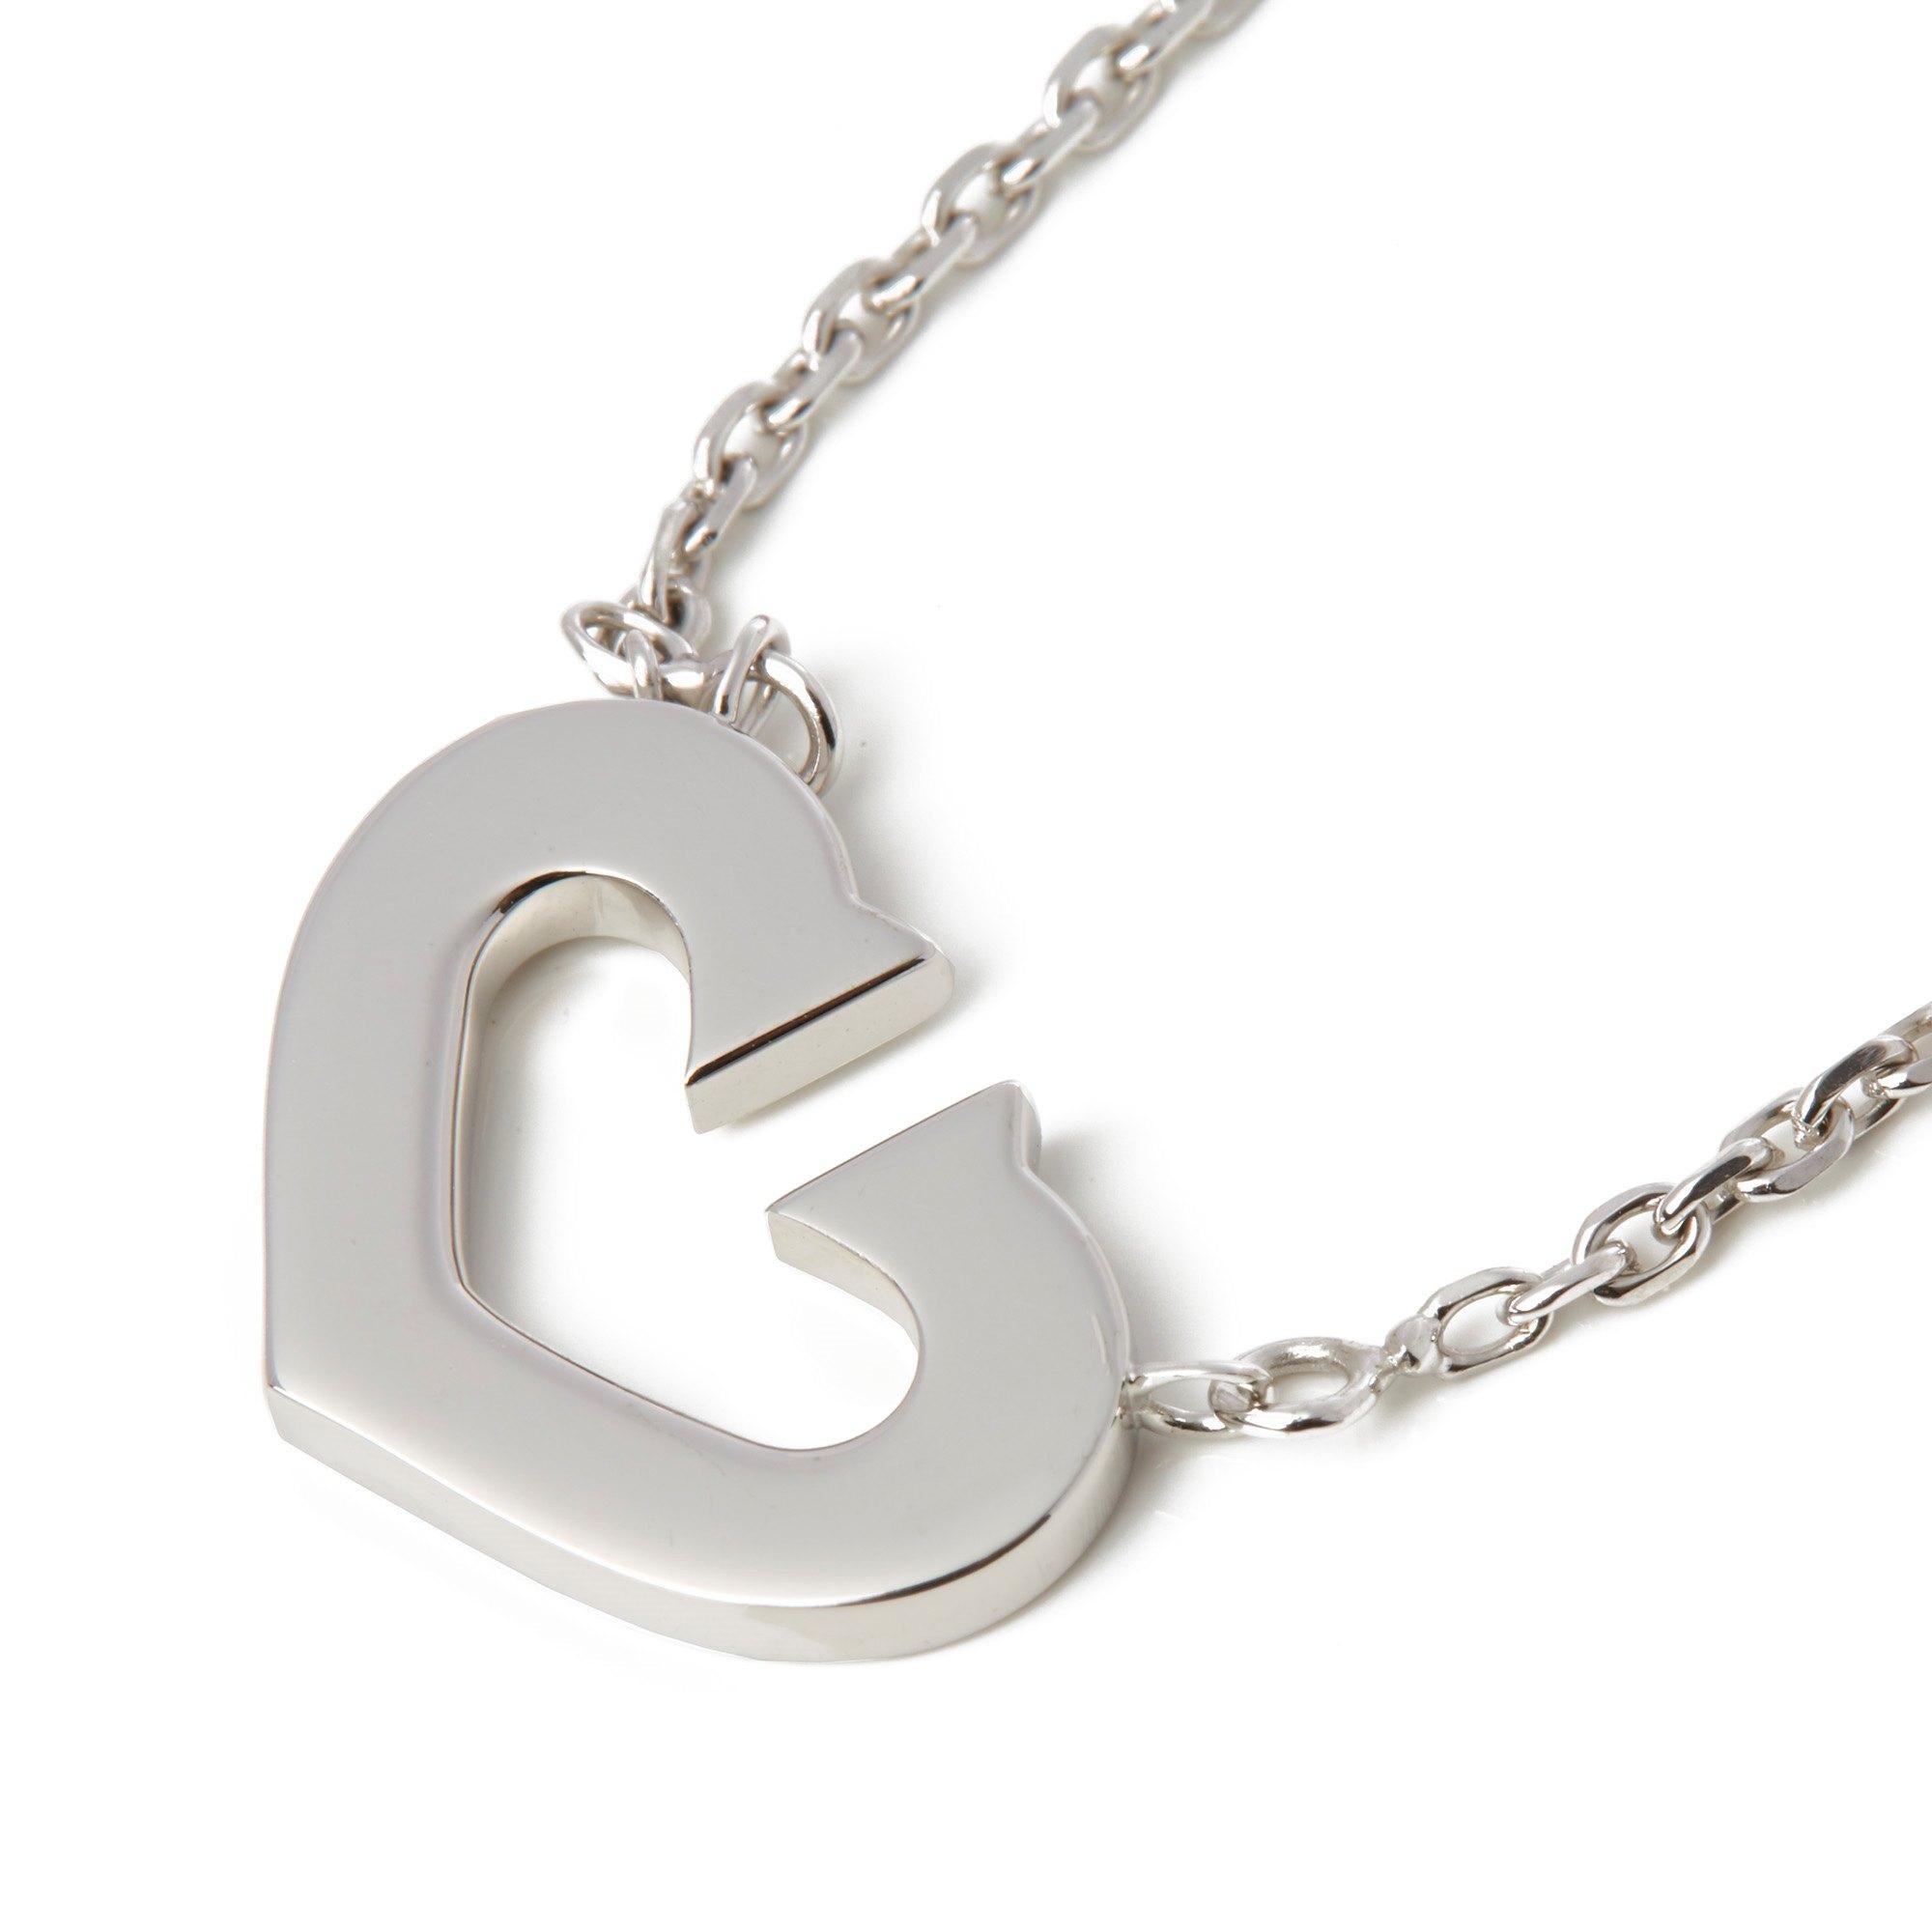 This Necklace by Cartier is from their Hearts and Symbols collection and features a single open heart with 40cm Trace Chain set in 18k White Gold. Complete with Xupes Presentation Box. Our Xupes reference is COM447 should you need to quote this.